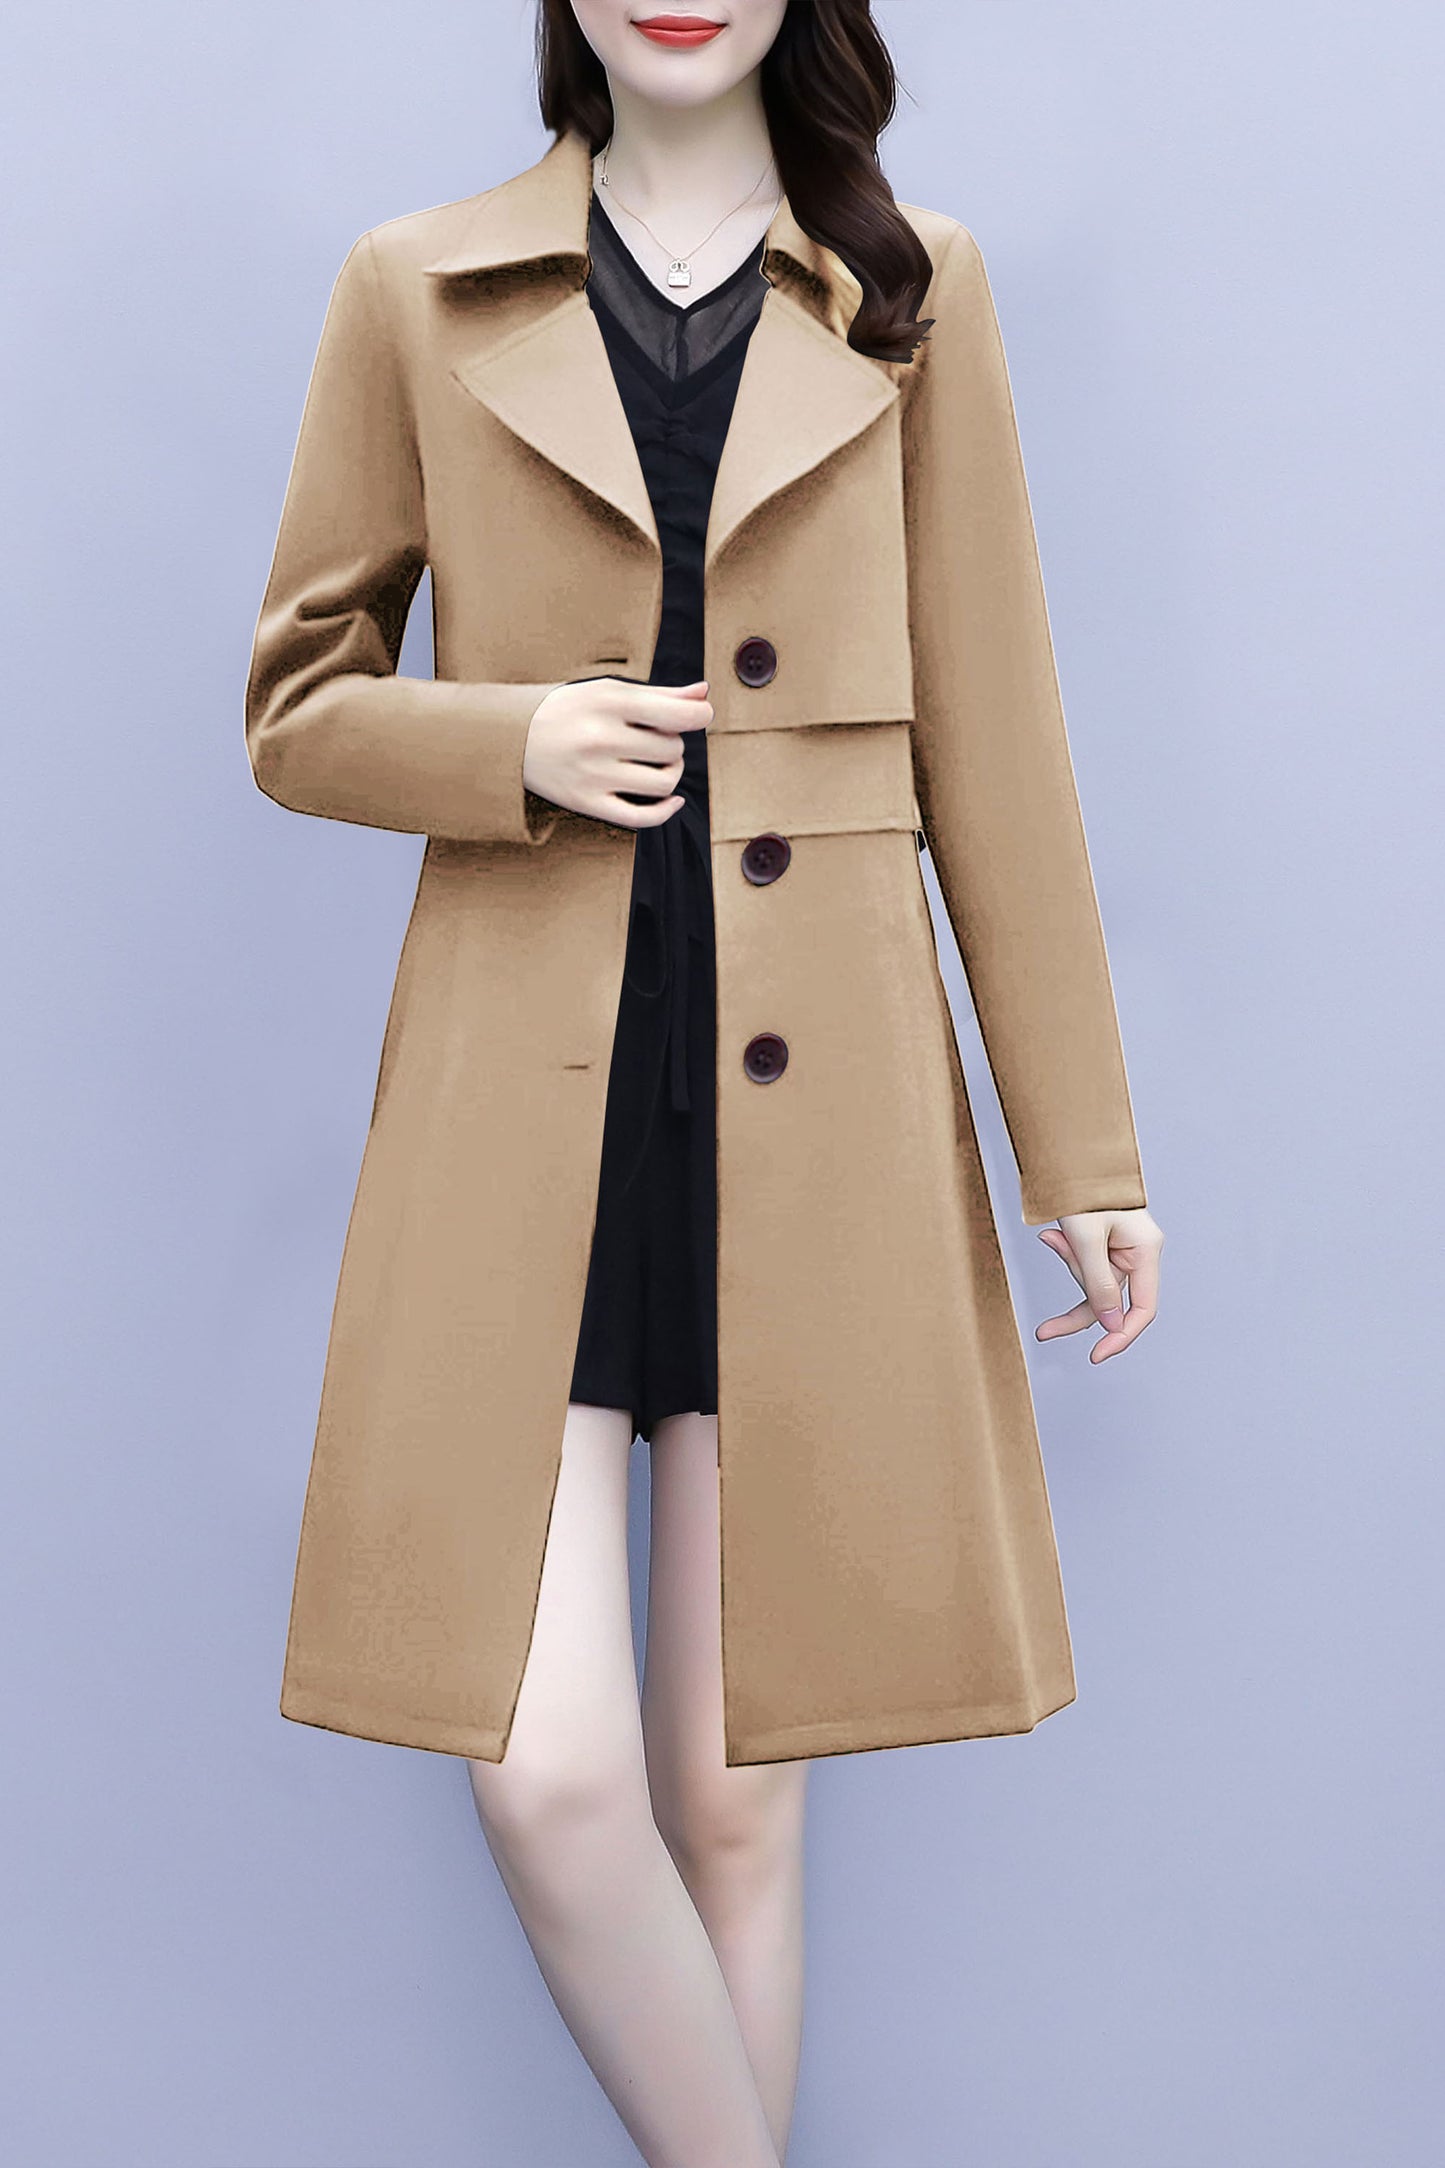 Apricot 3/4 Length Button up Outerwear Trench Coat with Belt